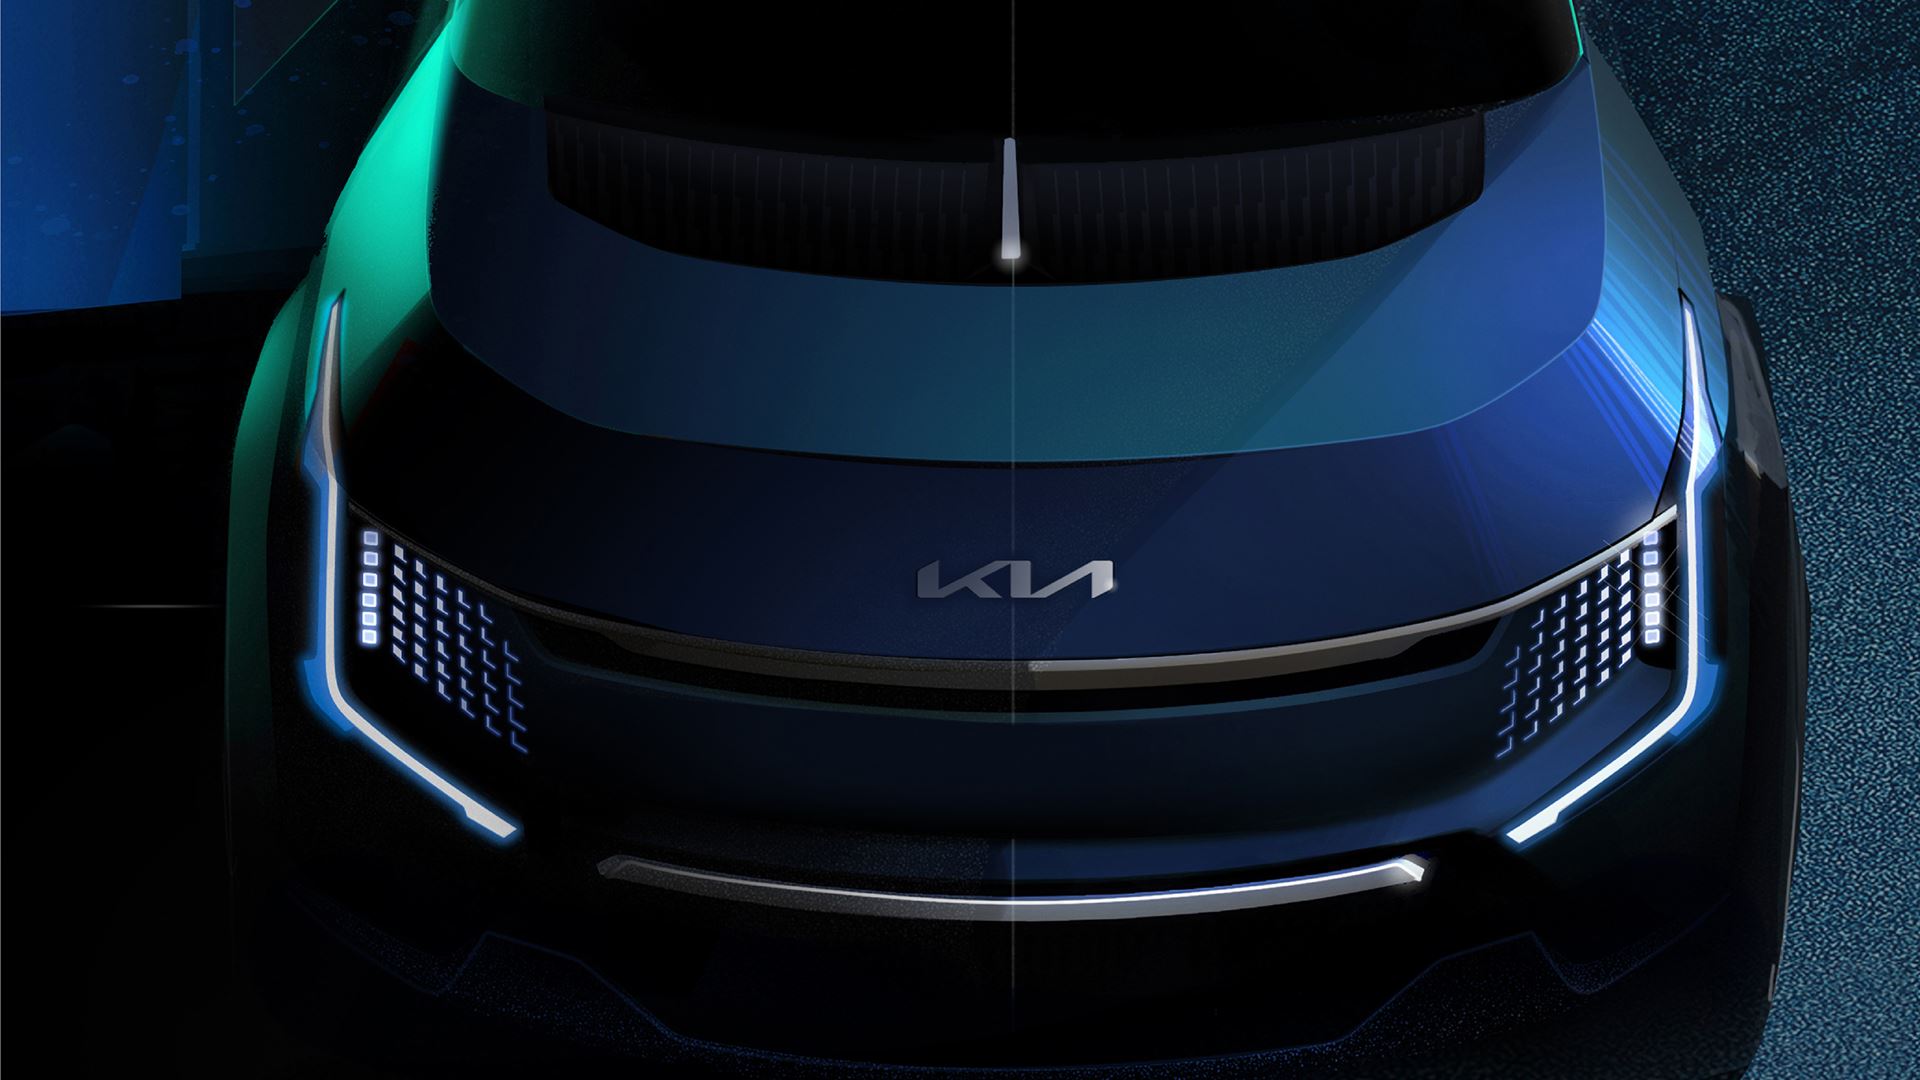 Kia teases Concept EV9 – a manifestation of its vision as a sustainable mobility solutions provider - Image 1